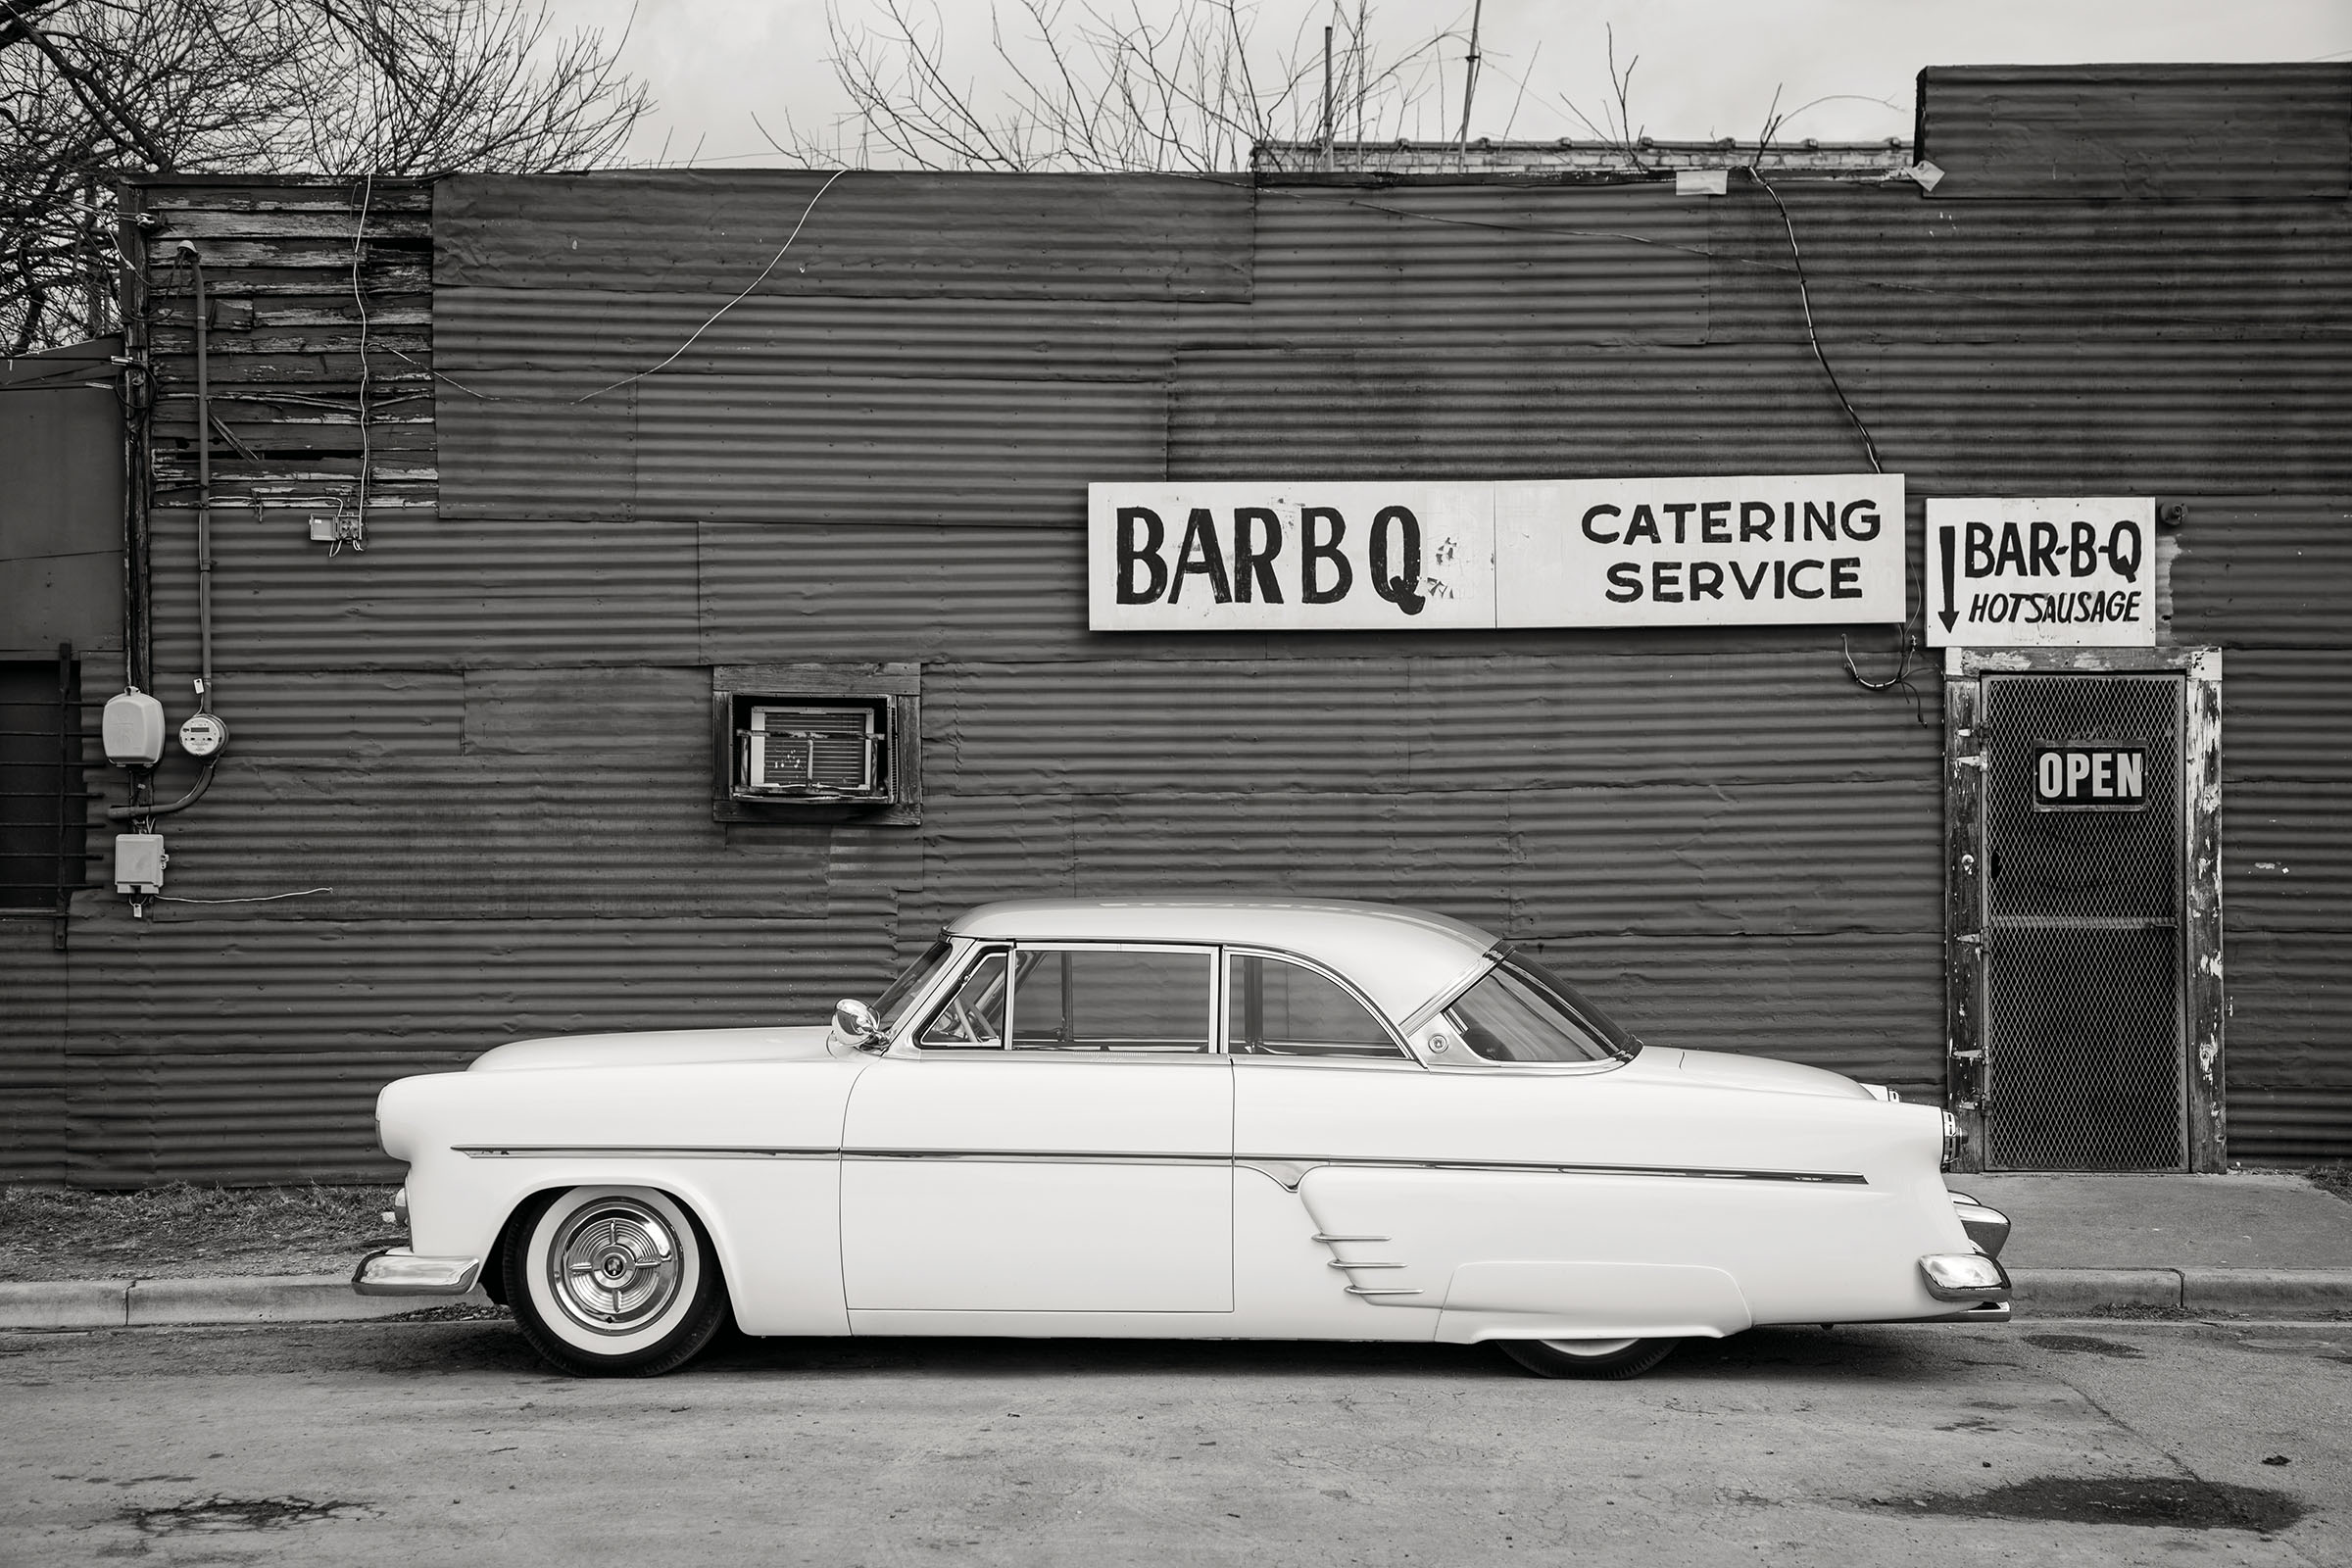 A long, white car in front of a brick building with a sign reading "Bar BQ Catering Service"